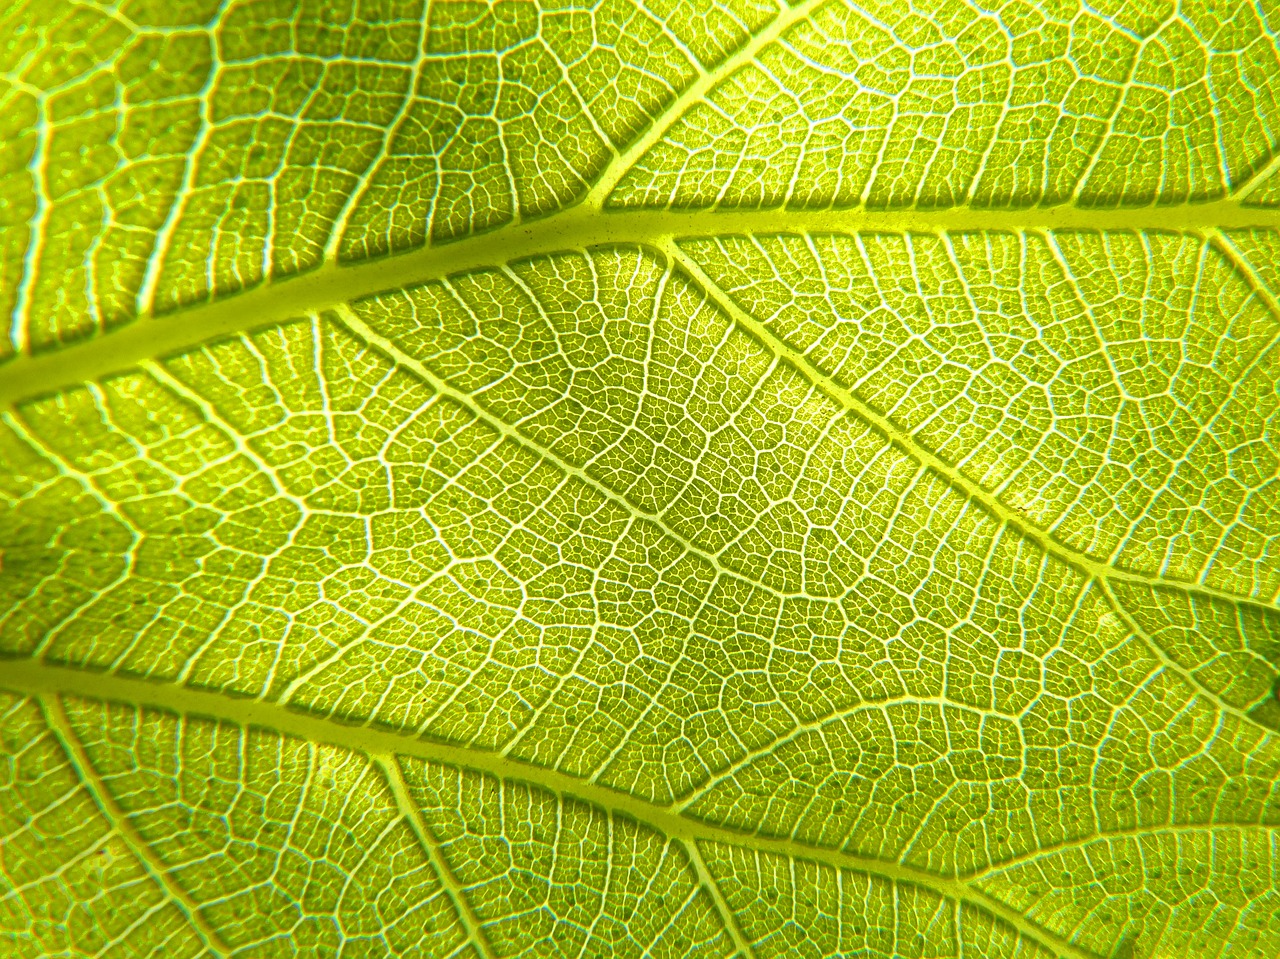 Download free photo of Leaf, plant, photosynthesis, vein, asymmetry ...